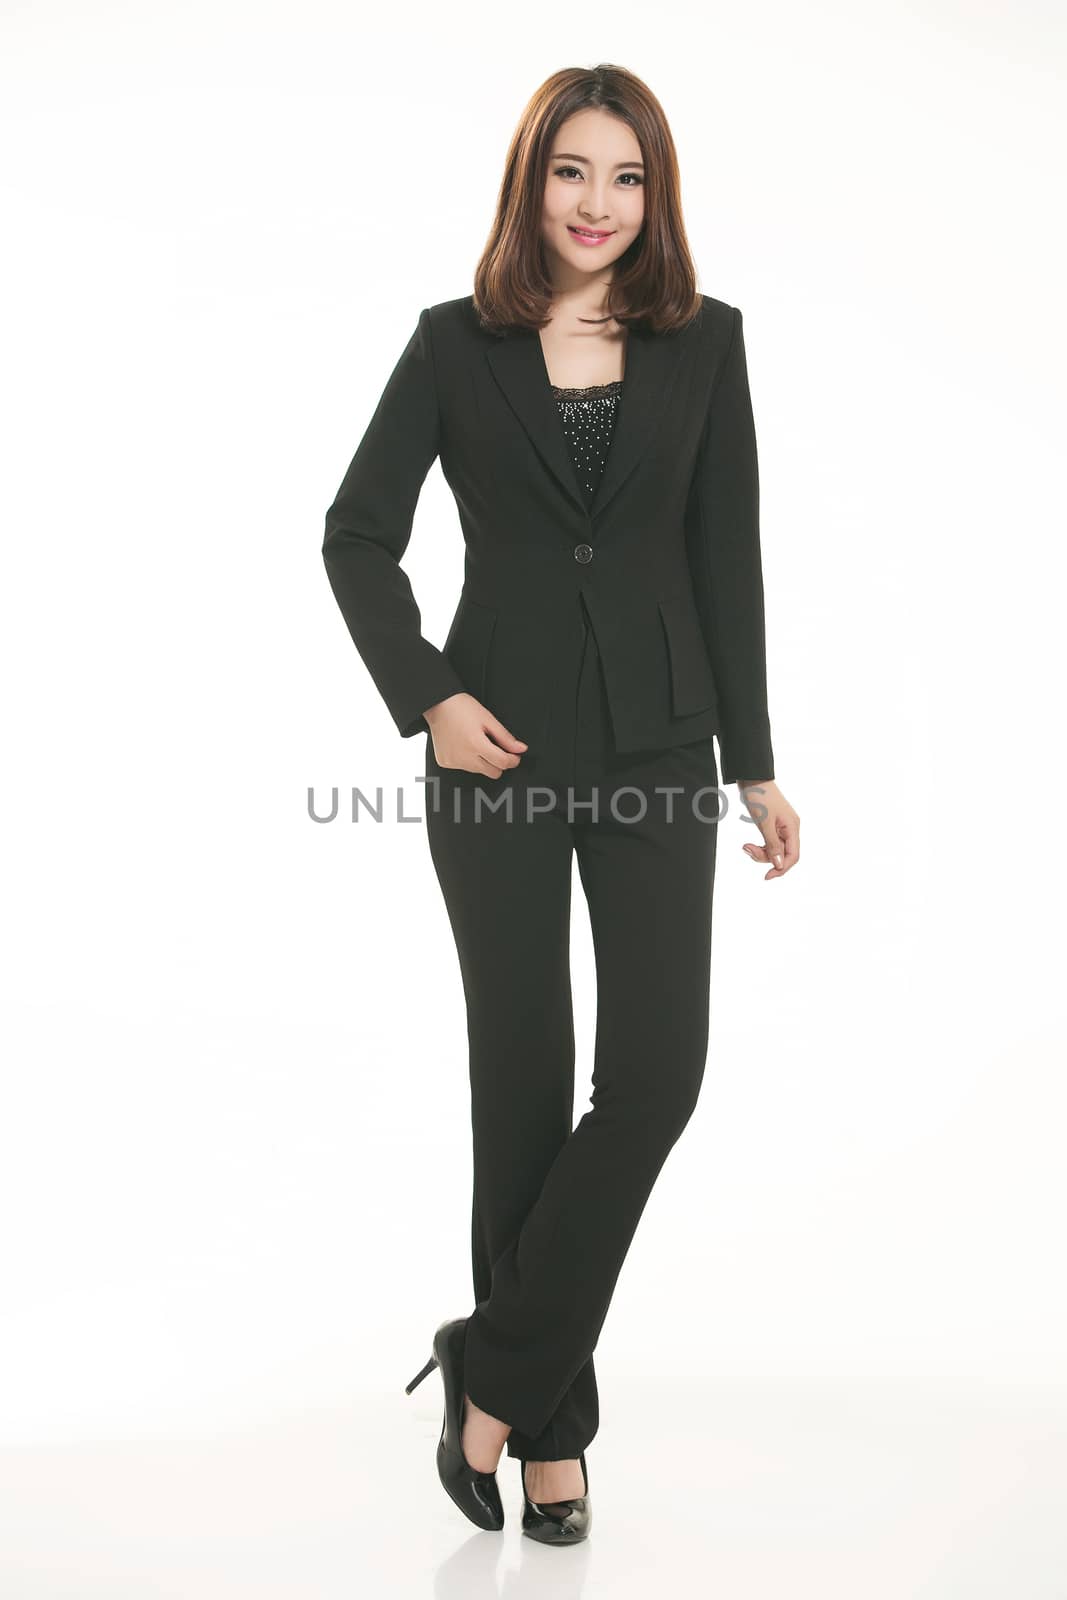 Young Asian women wearing a suit in front of a white background by quweichang